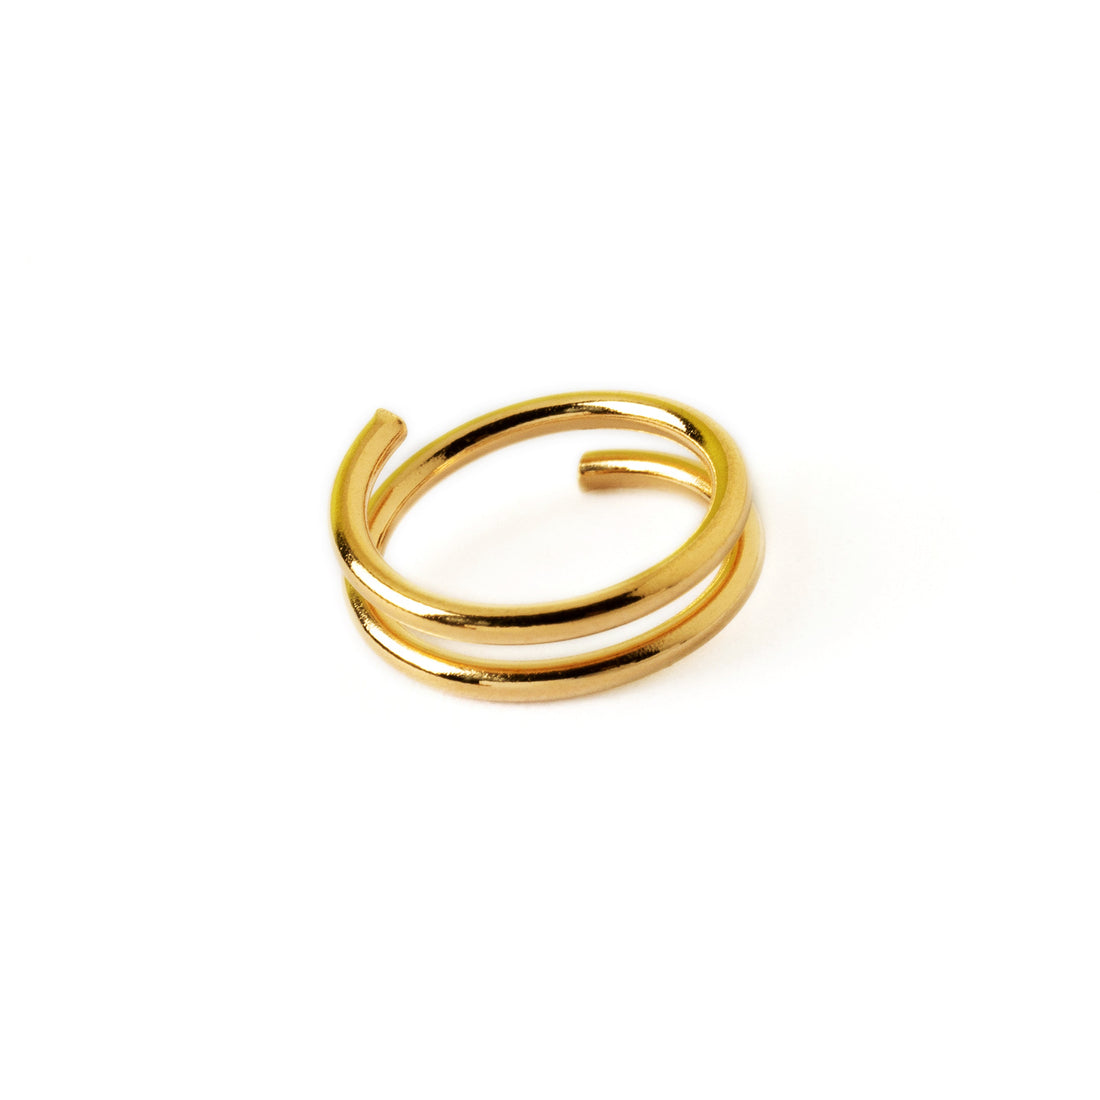 Spiralling Gold Nose Ring right side view